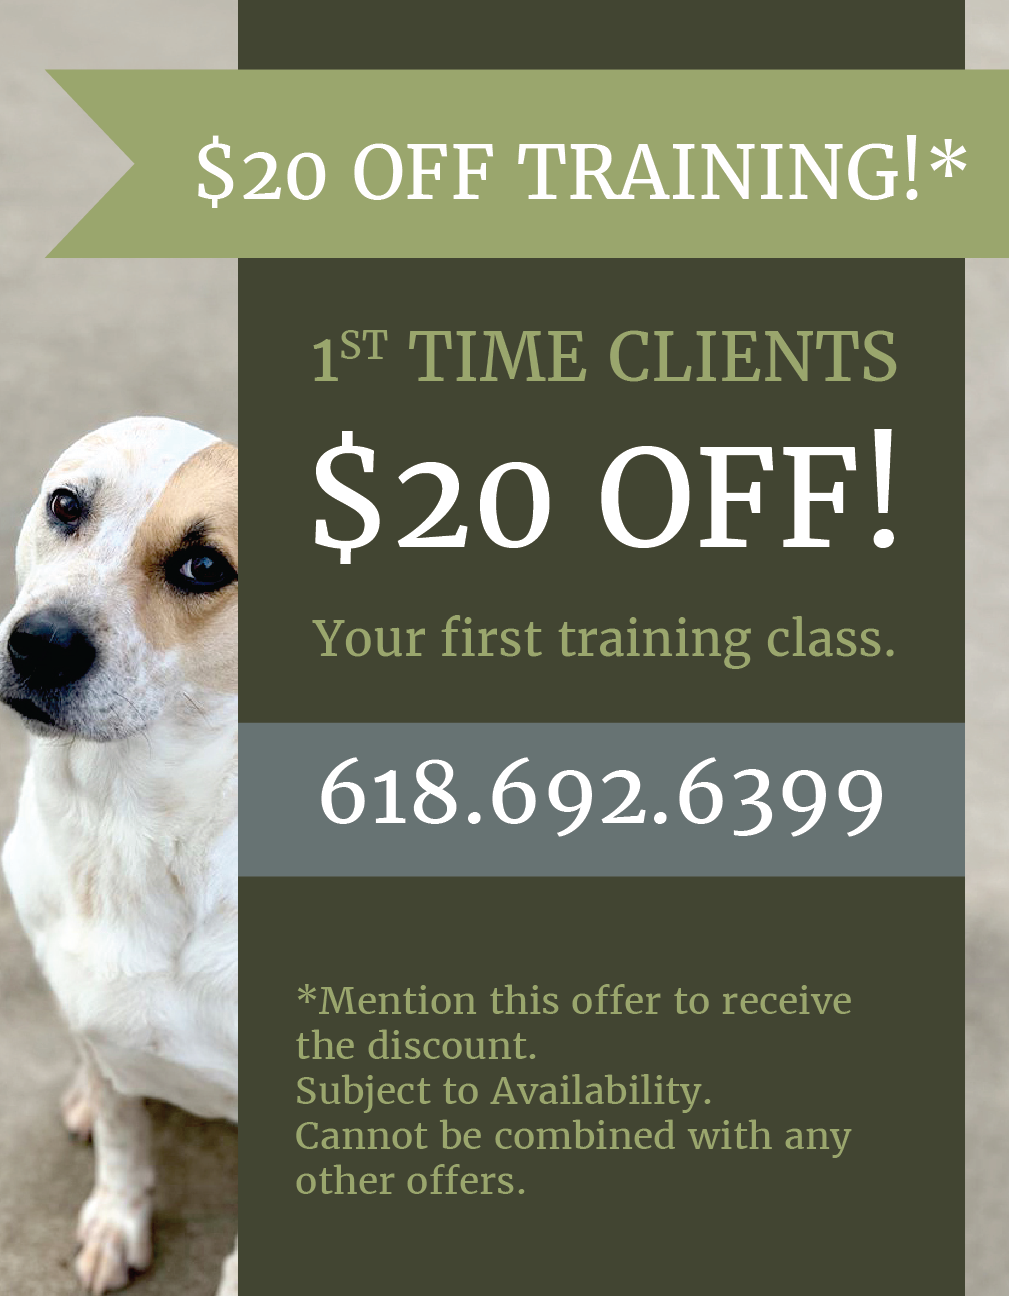 Special Training Offer from LaBest Pet Resort and Spa